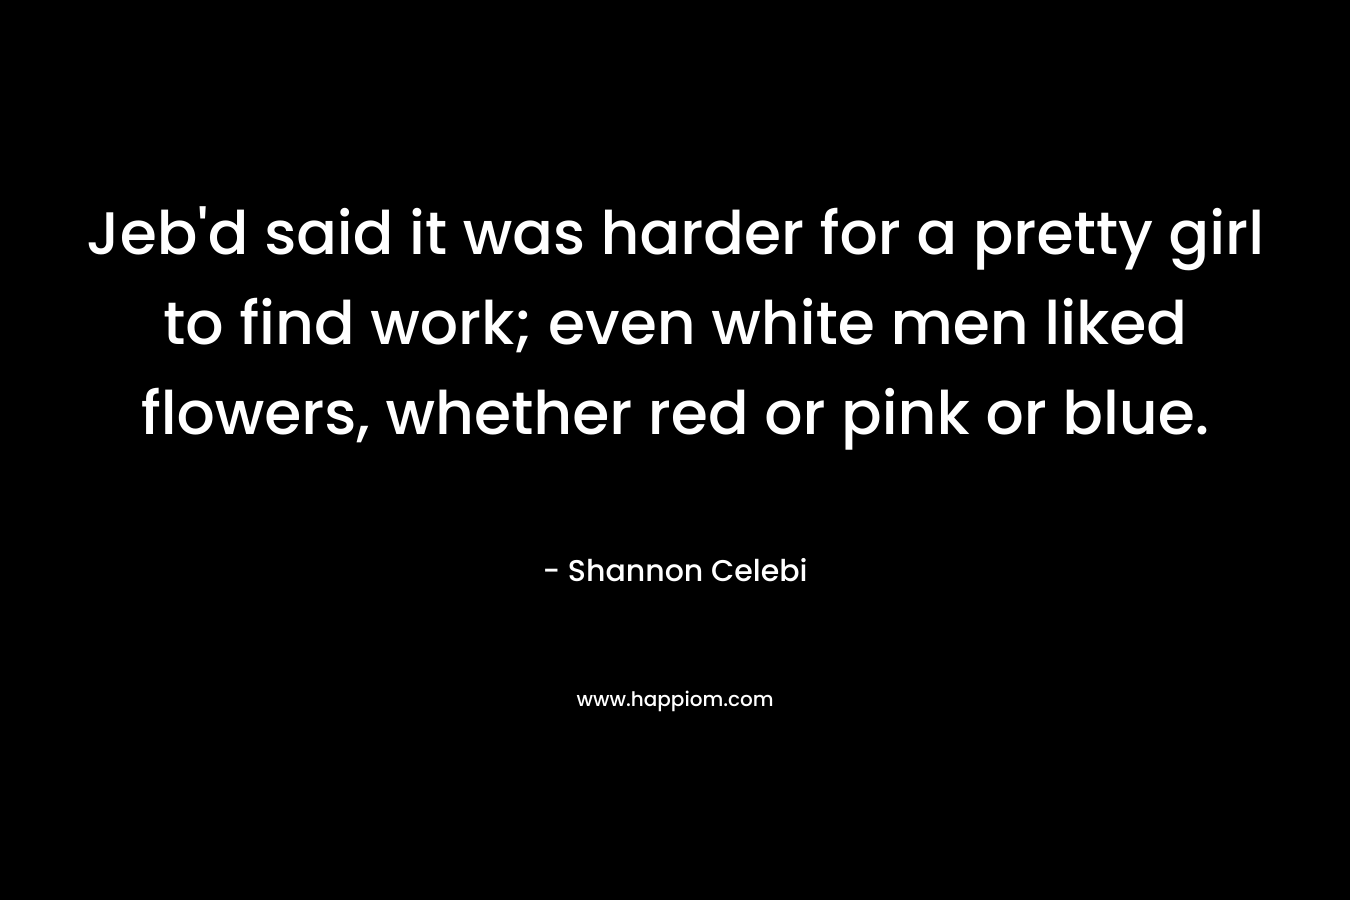 Jeb’d said it was harder for a pretty girl to find work; even white men liked flowers, whether red or pink or blue. – Shannon Celebi